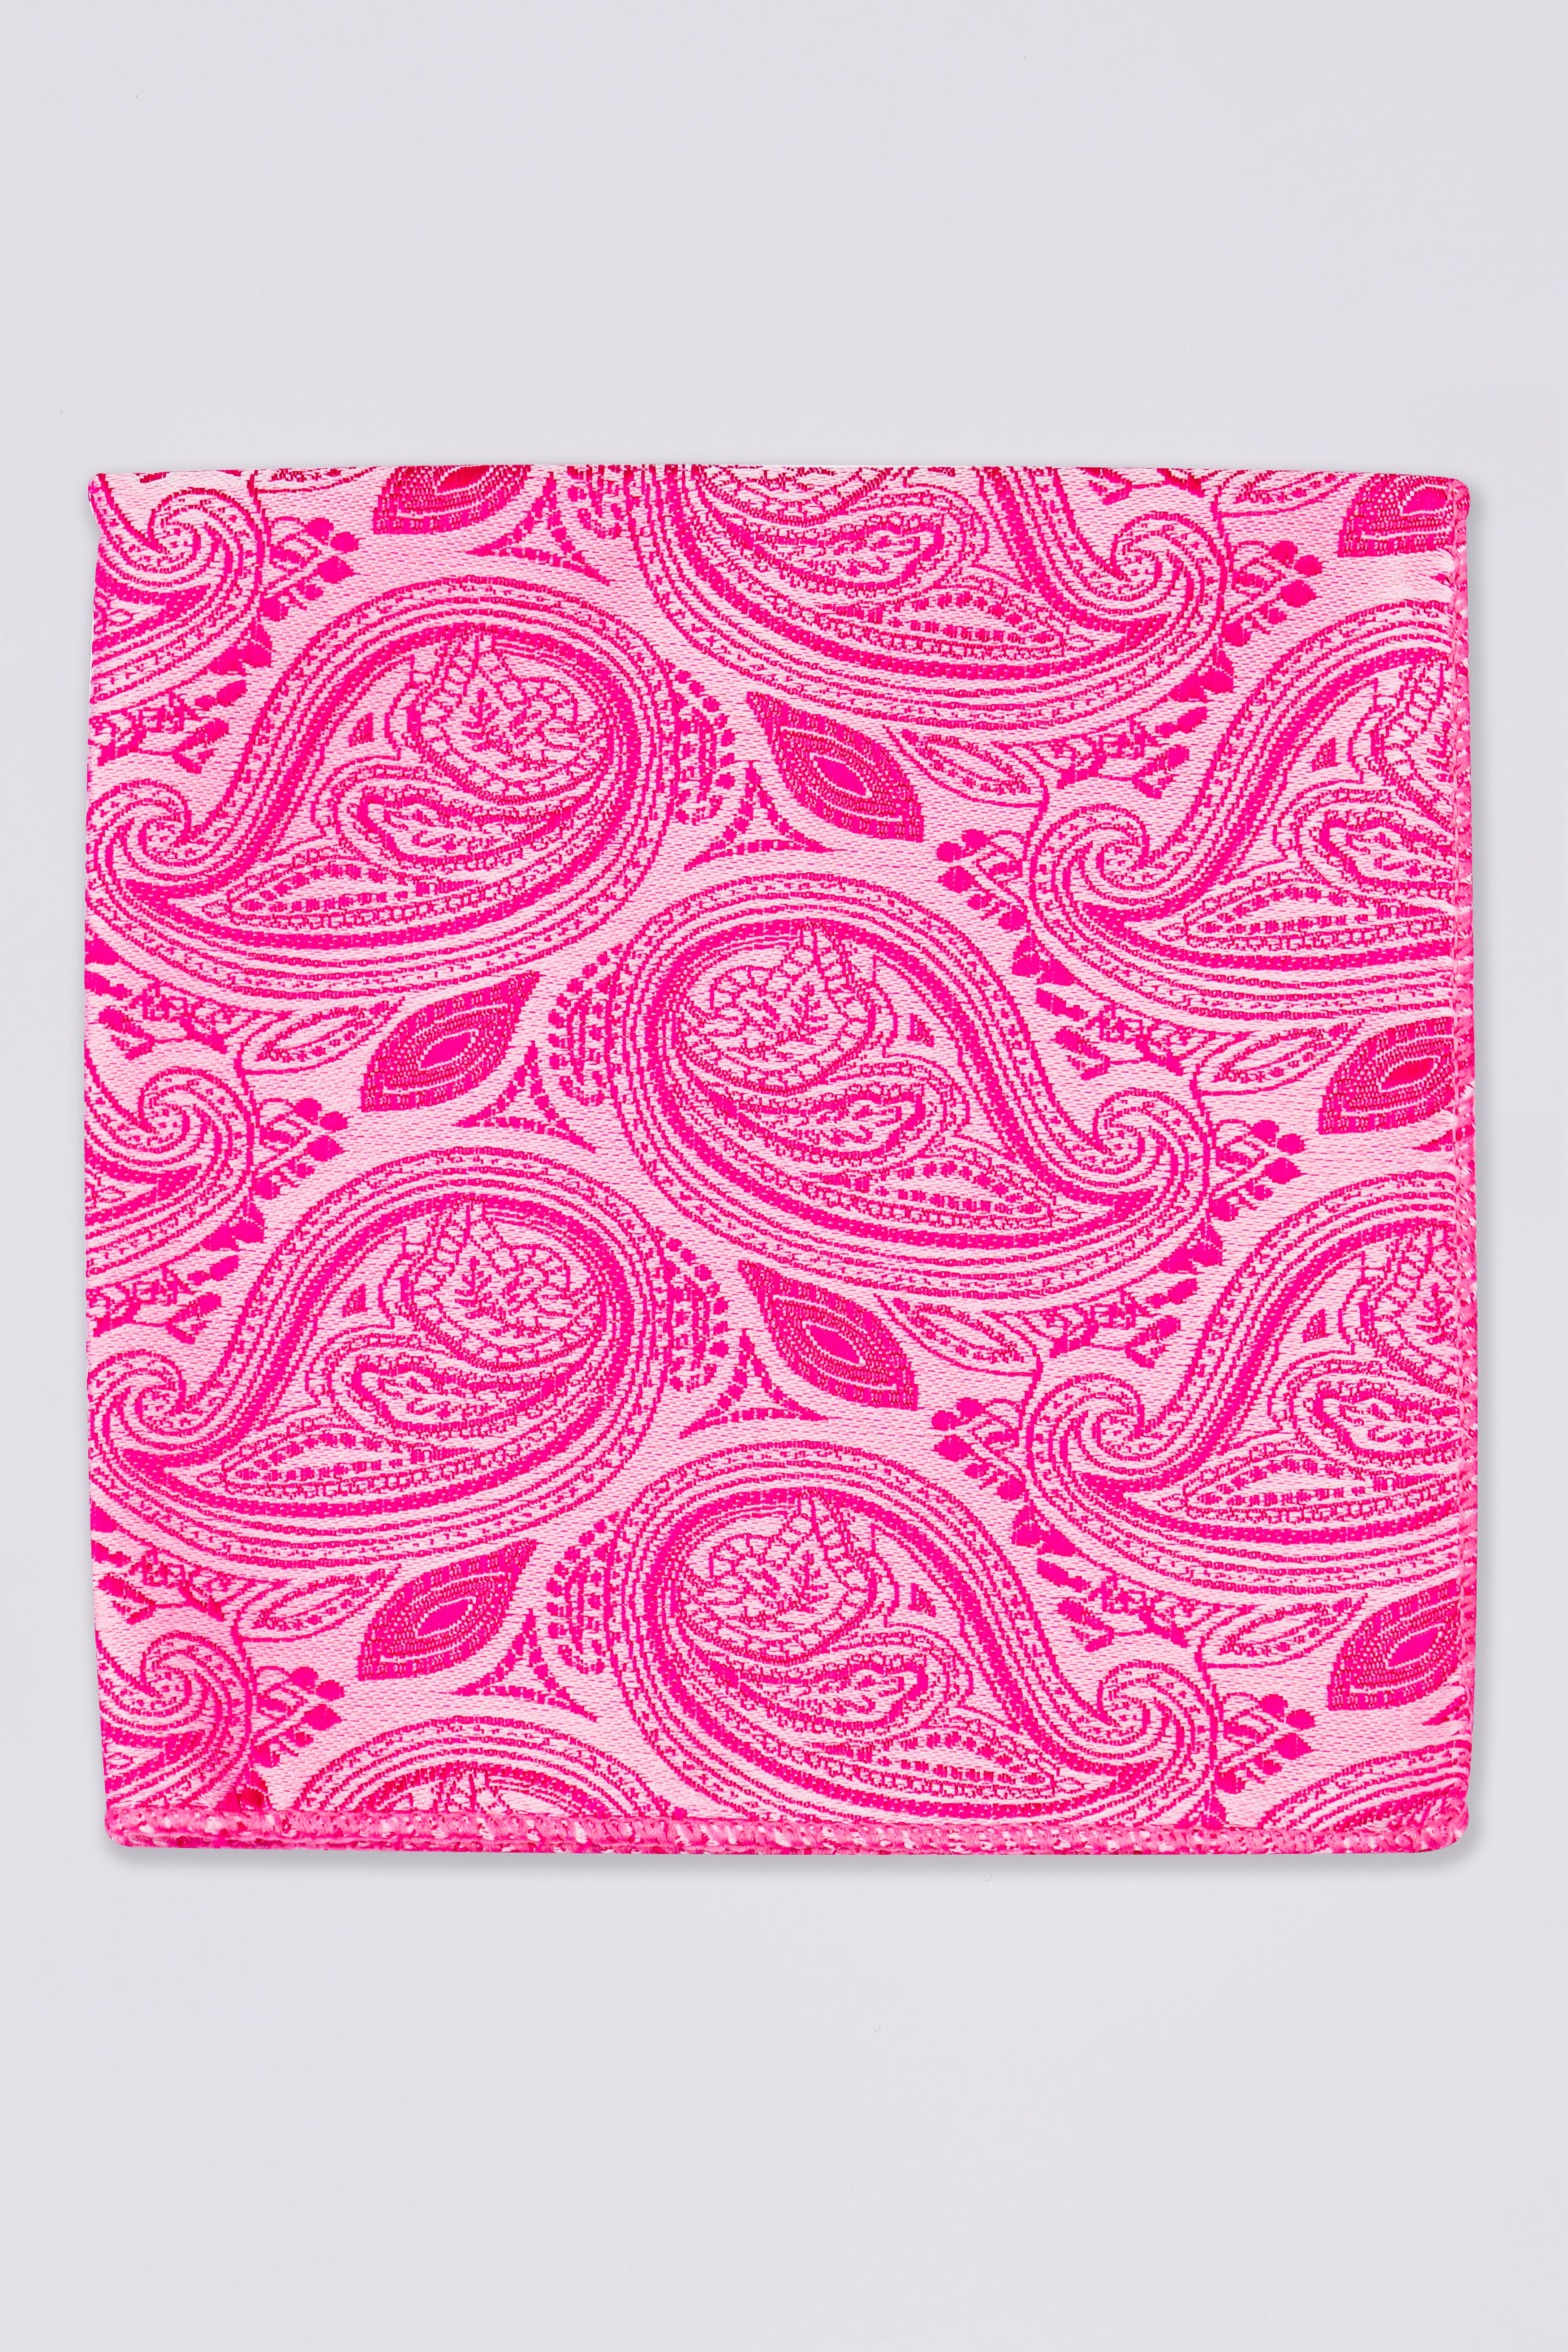 Magenta Pink with Illusion Light Pink Paisley Jacquard Tie with Pocket Square  TP060